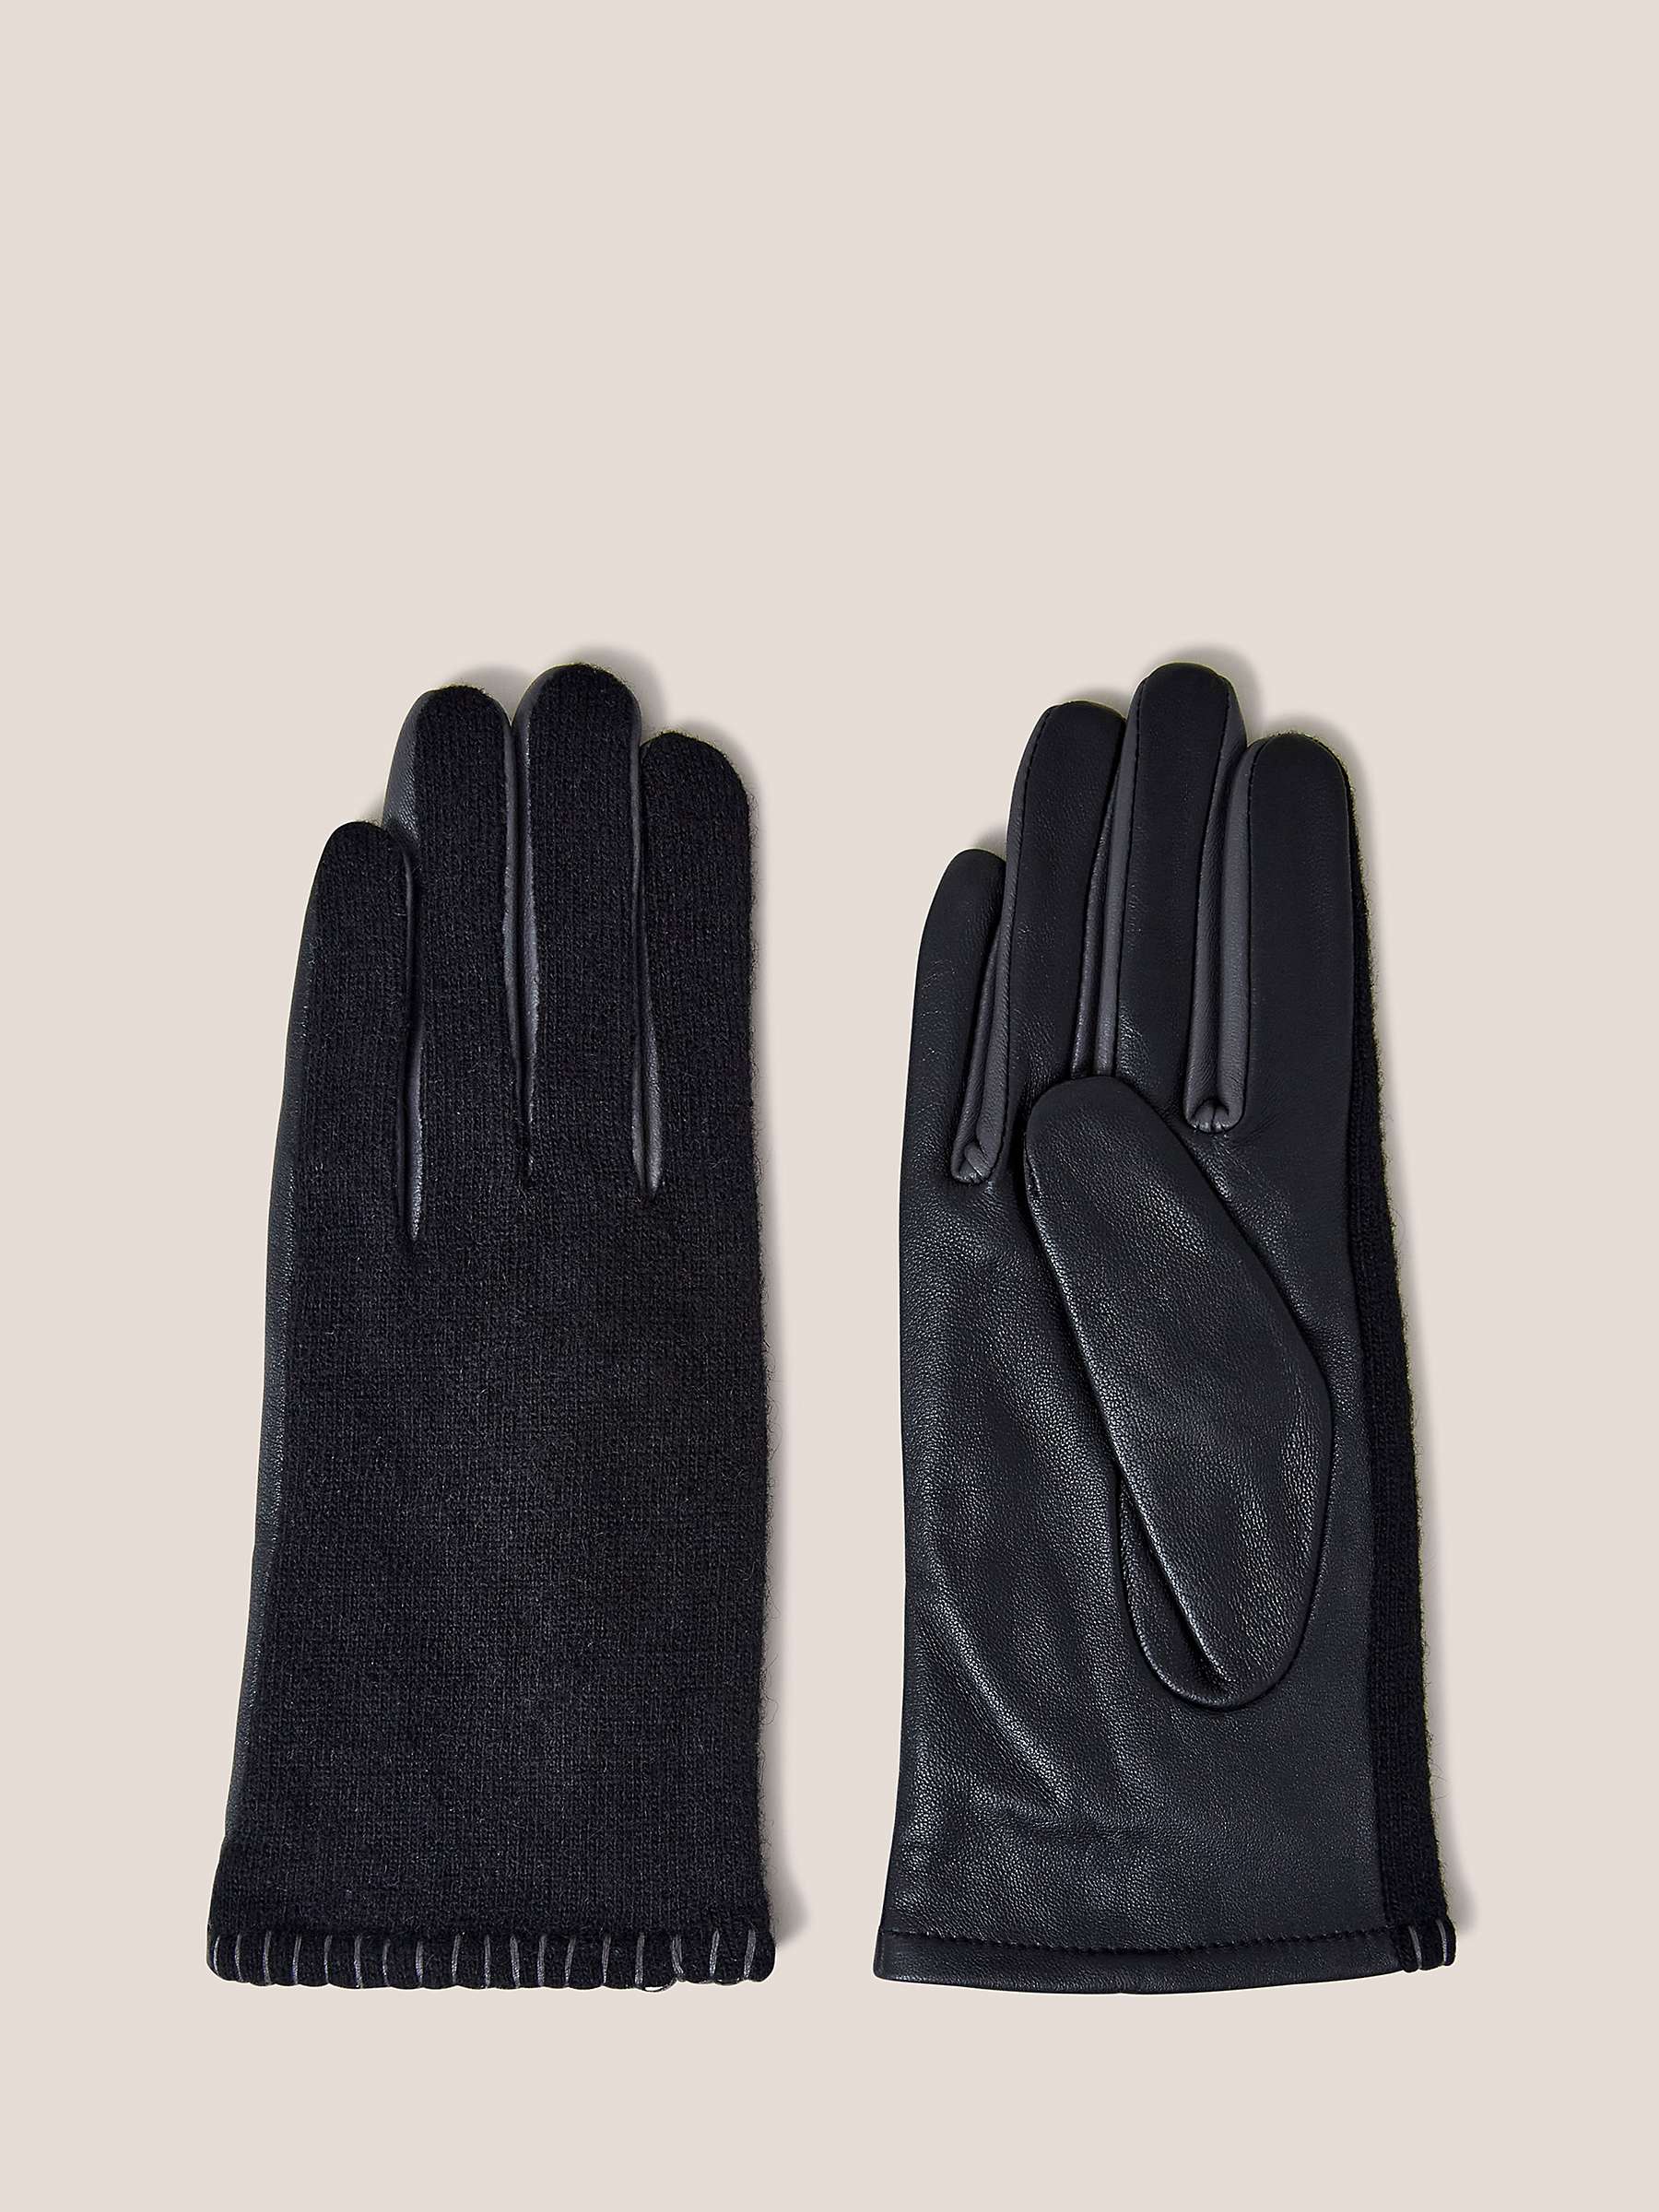 White Stuff Lucie Leather Gloves, Pure Black at John Lewis & Partners